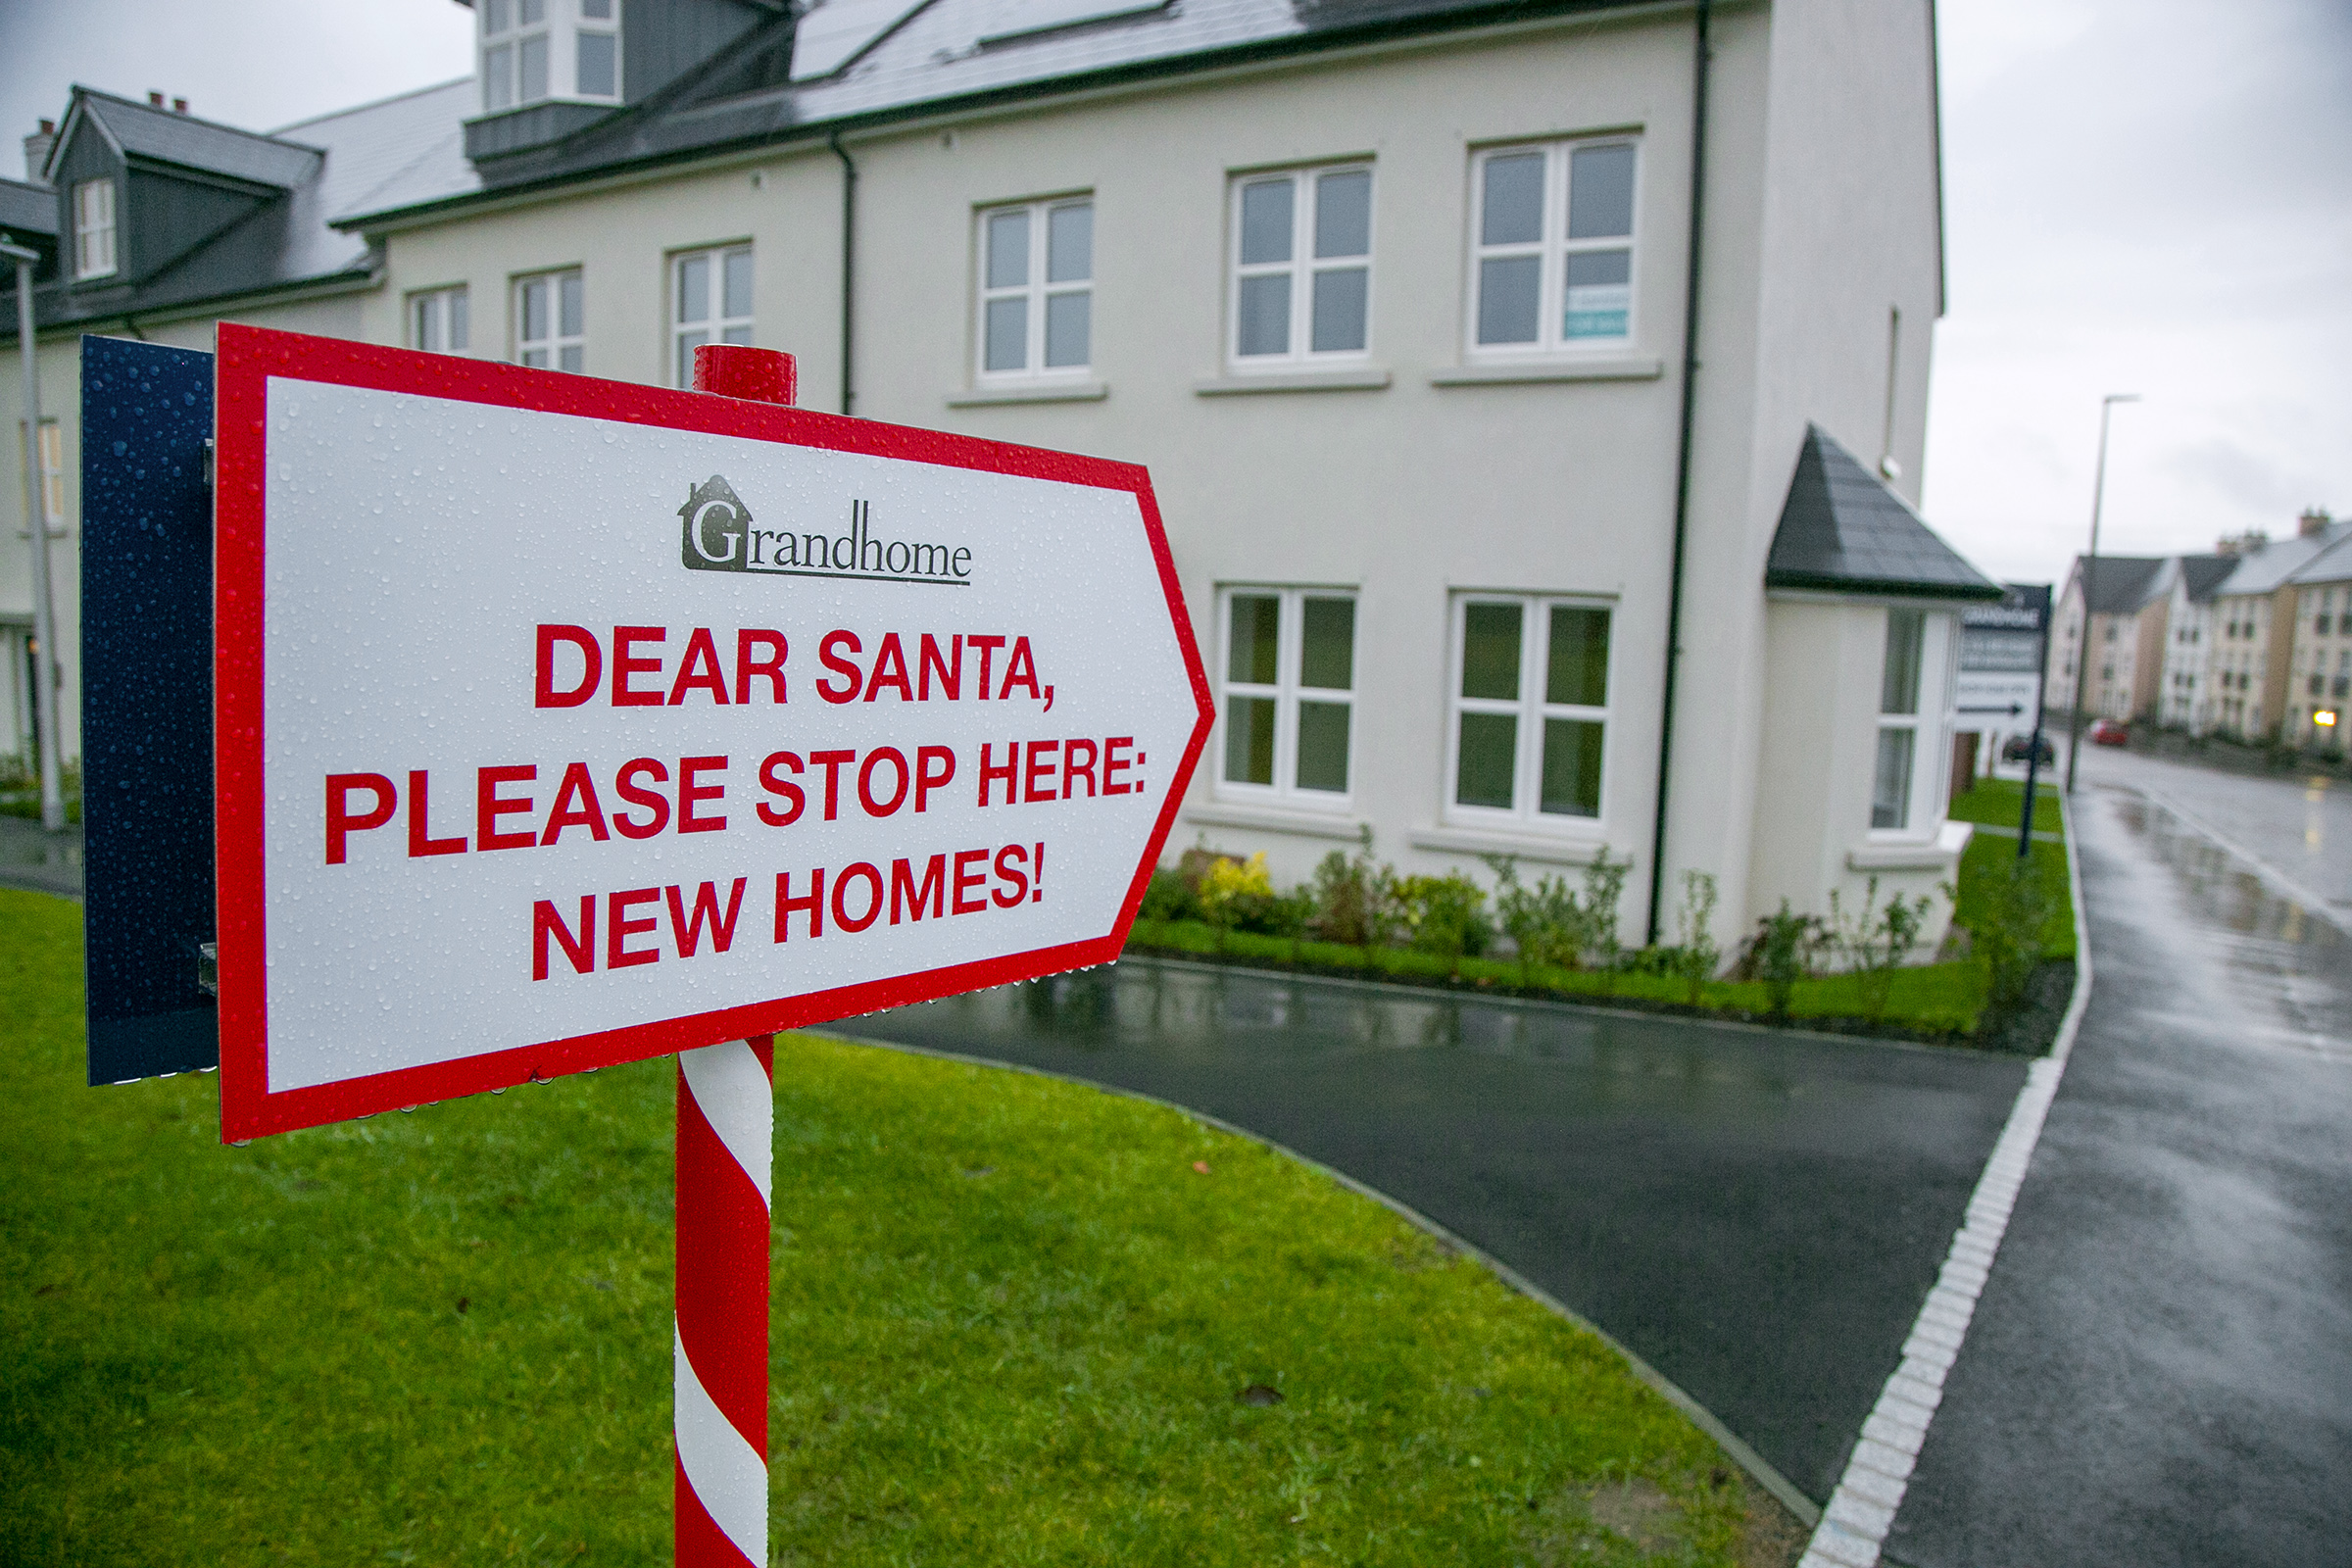 Grandhome residents to move in by Christmas